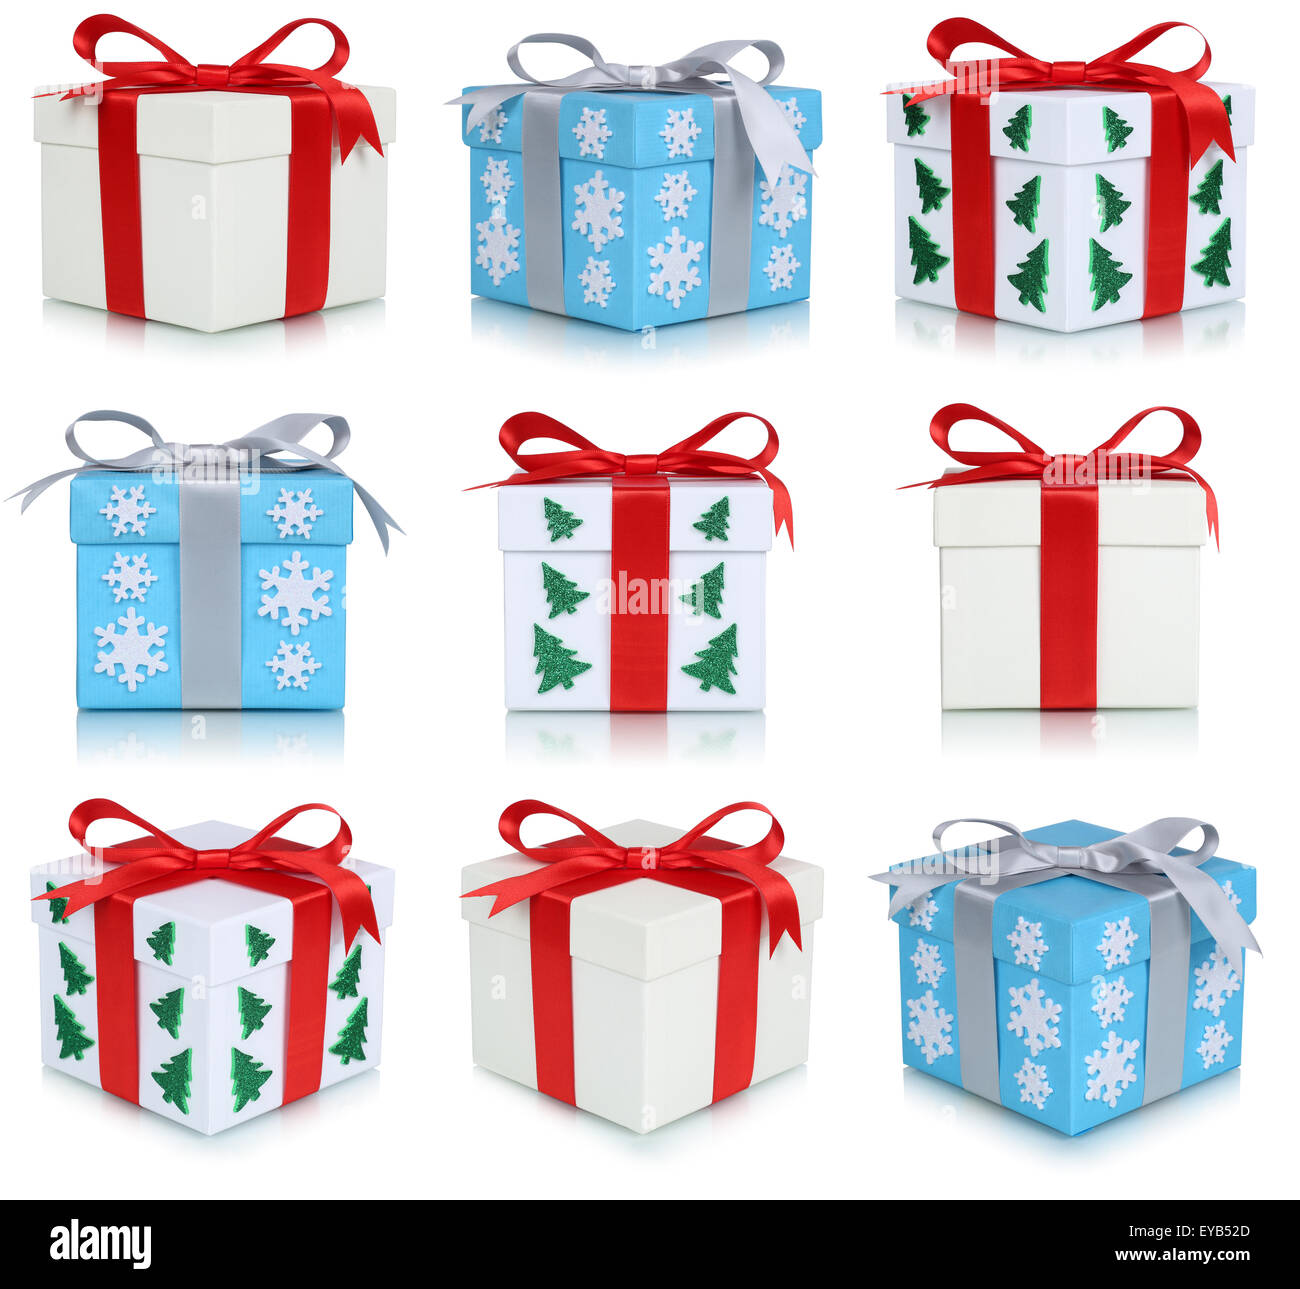 Christmas gift boxes collection of gifts isolated on a white background Stock Photo